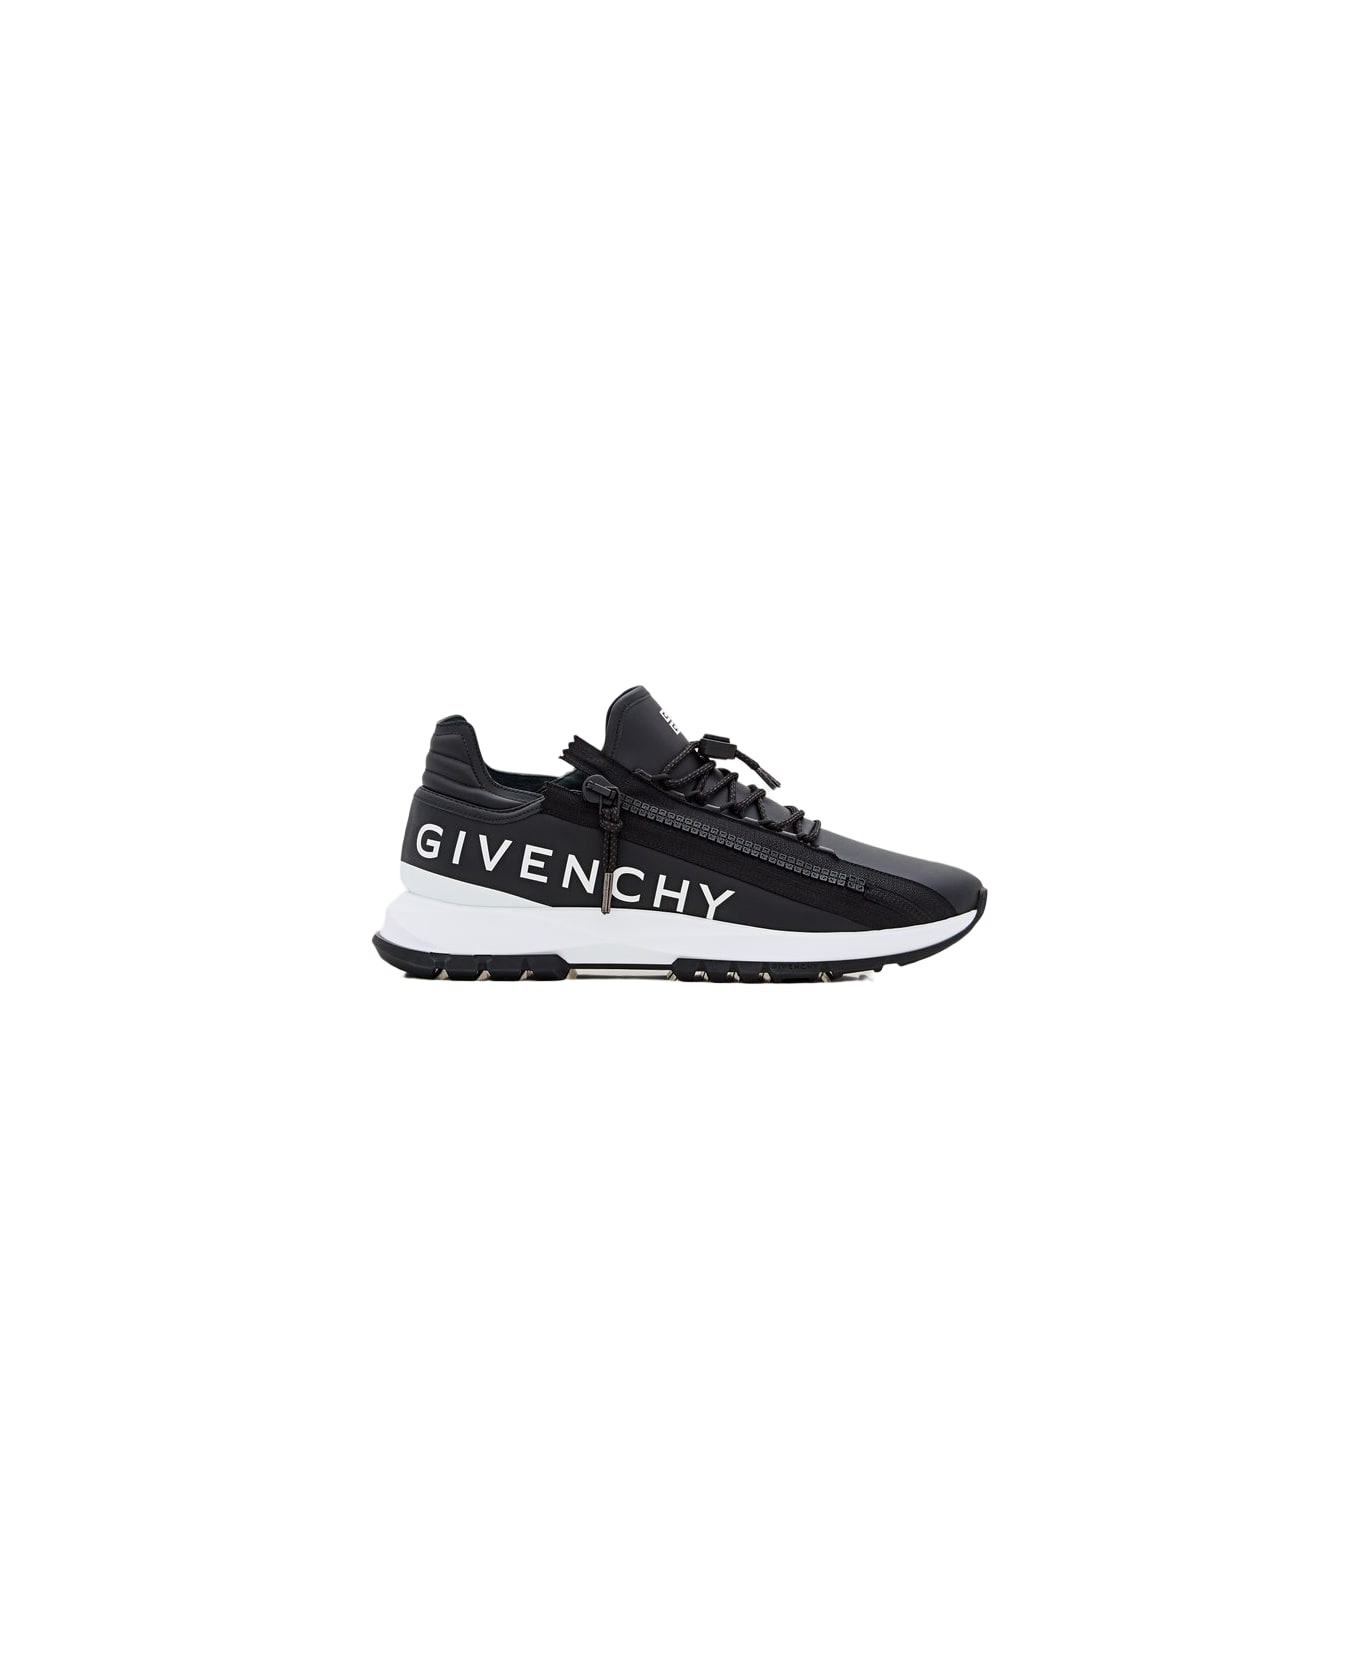 Givenchy Spectre Zip Runners - Black